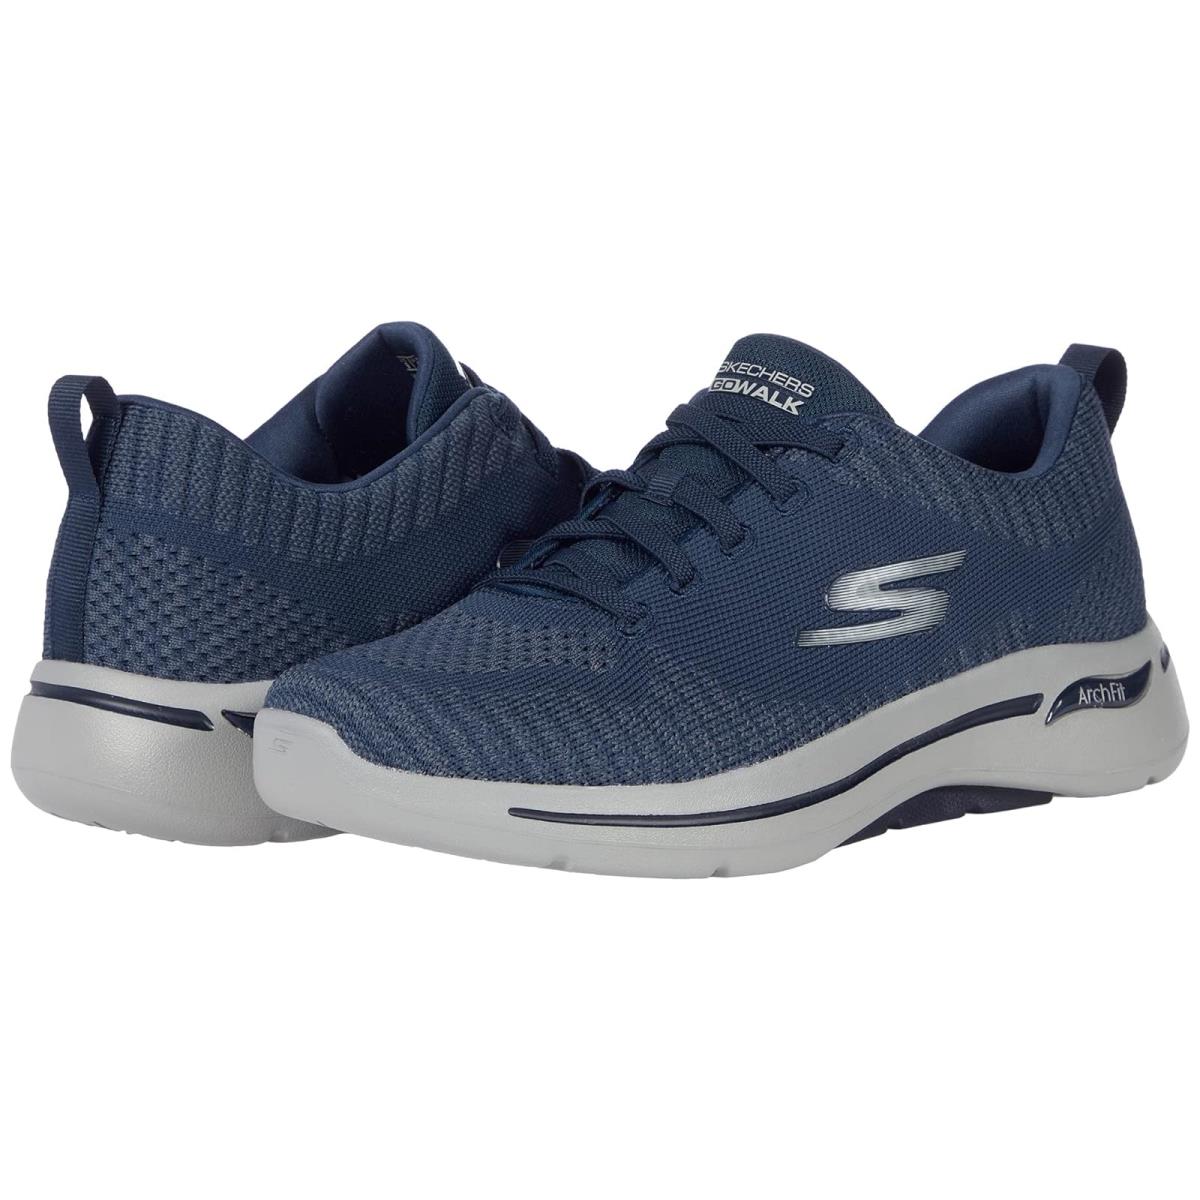 Man`s Shoes Skechers Performance Go Walk Arch Fit - 216126 Navy